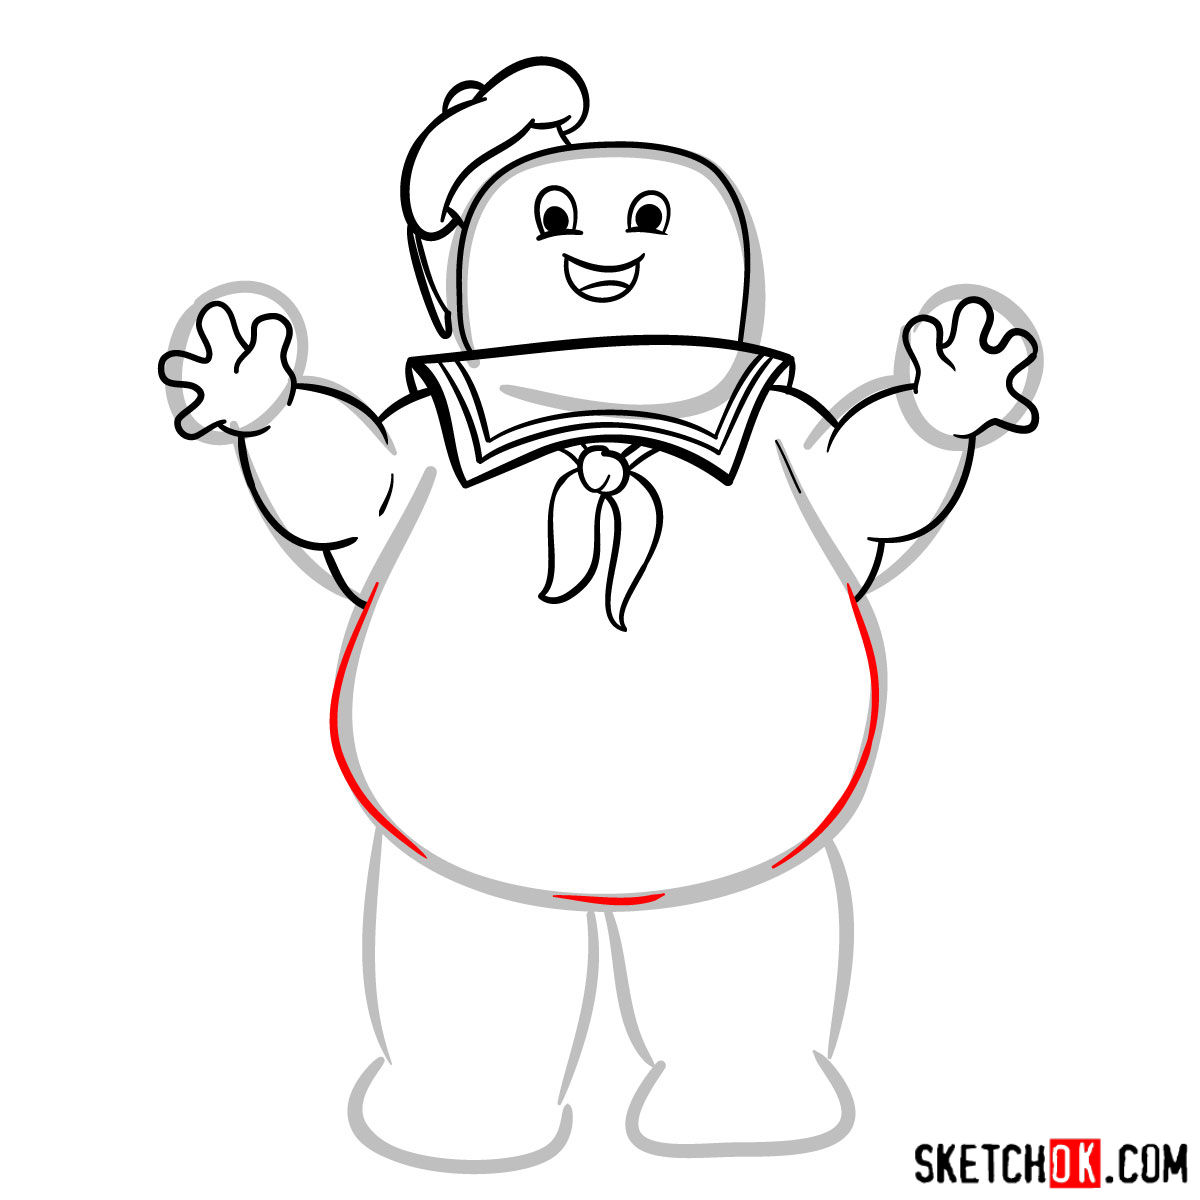 How to draw Stay Puft Marshmallow Man - step 07